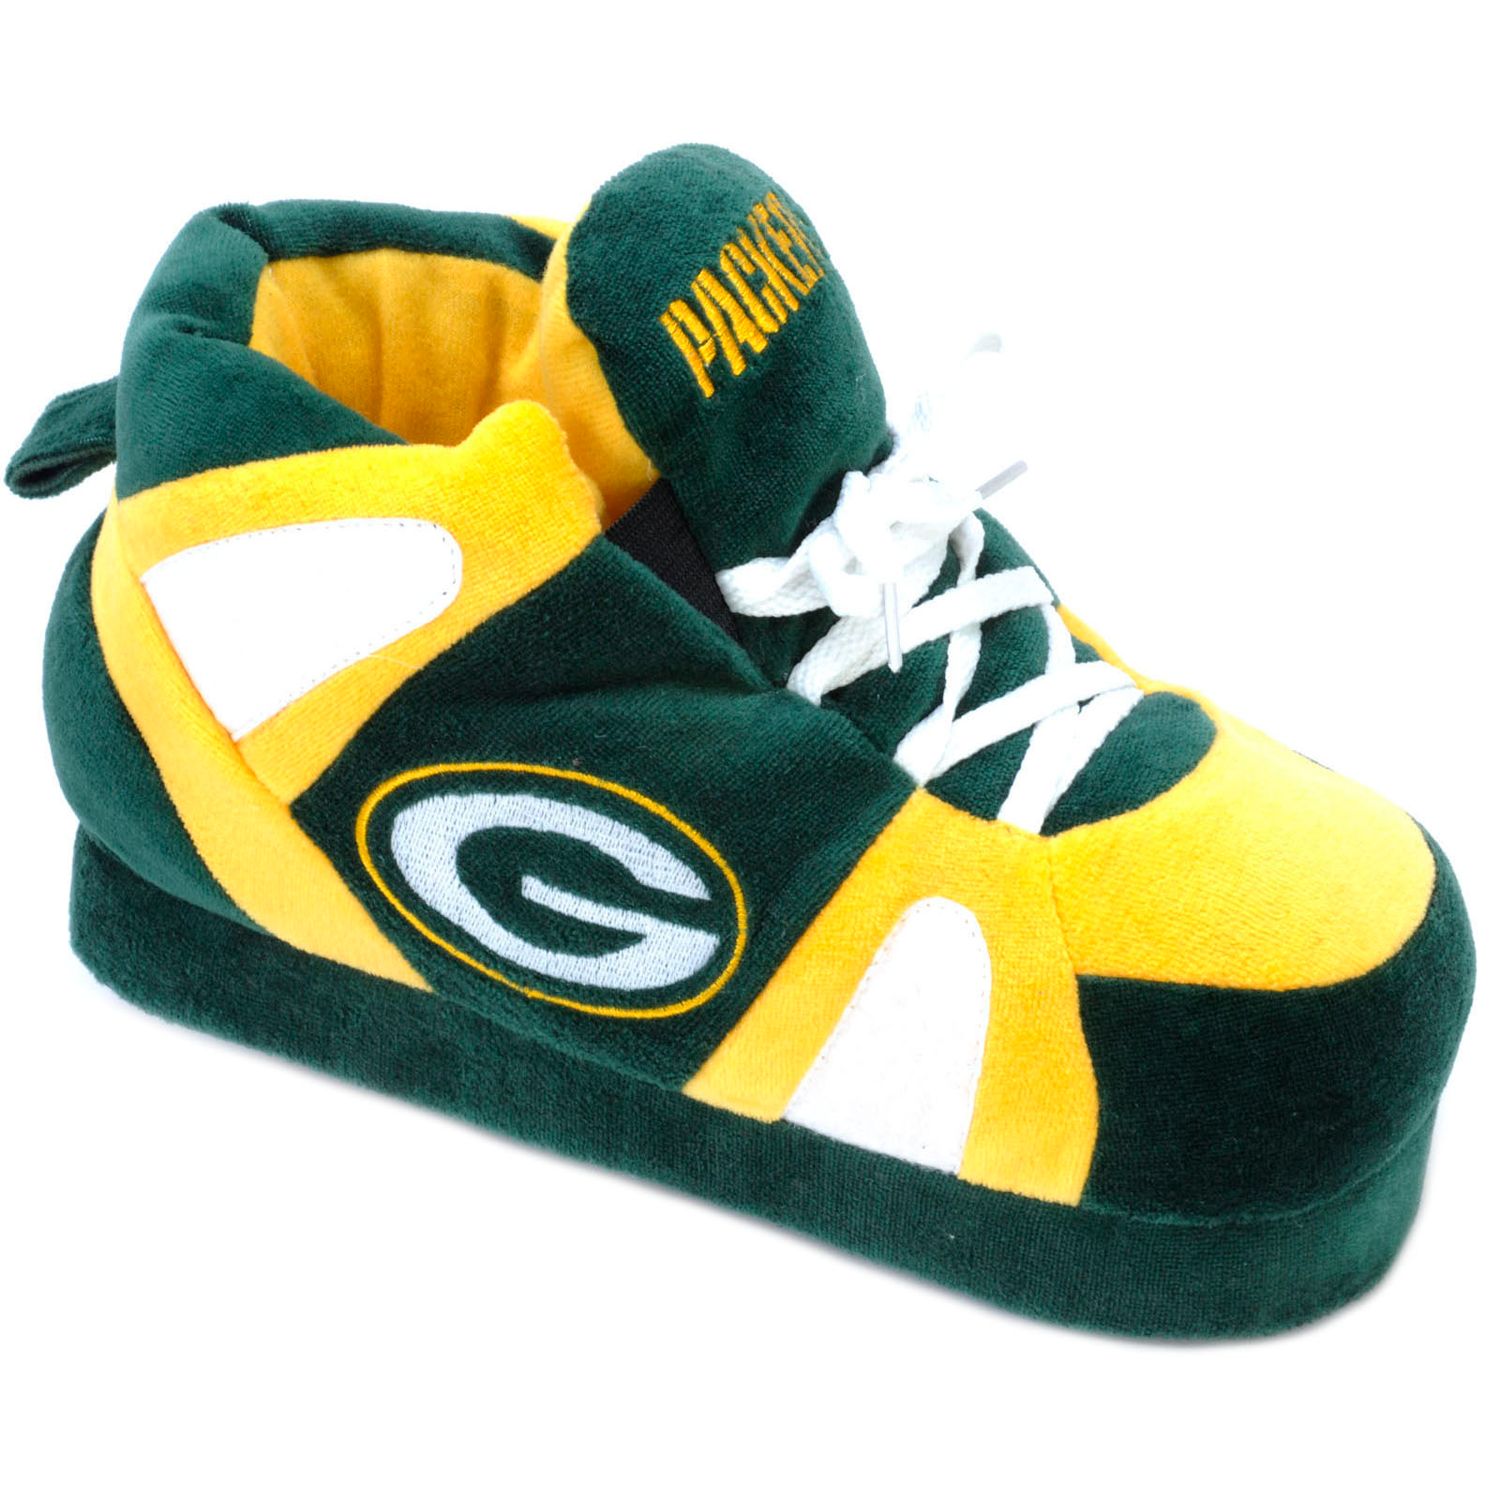 the bay mens slippers